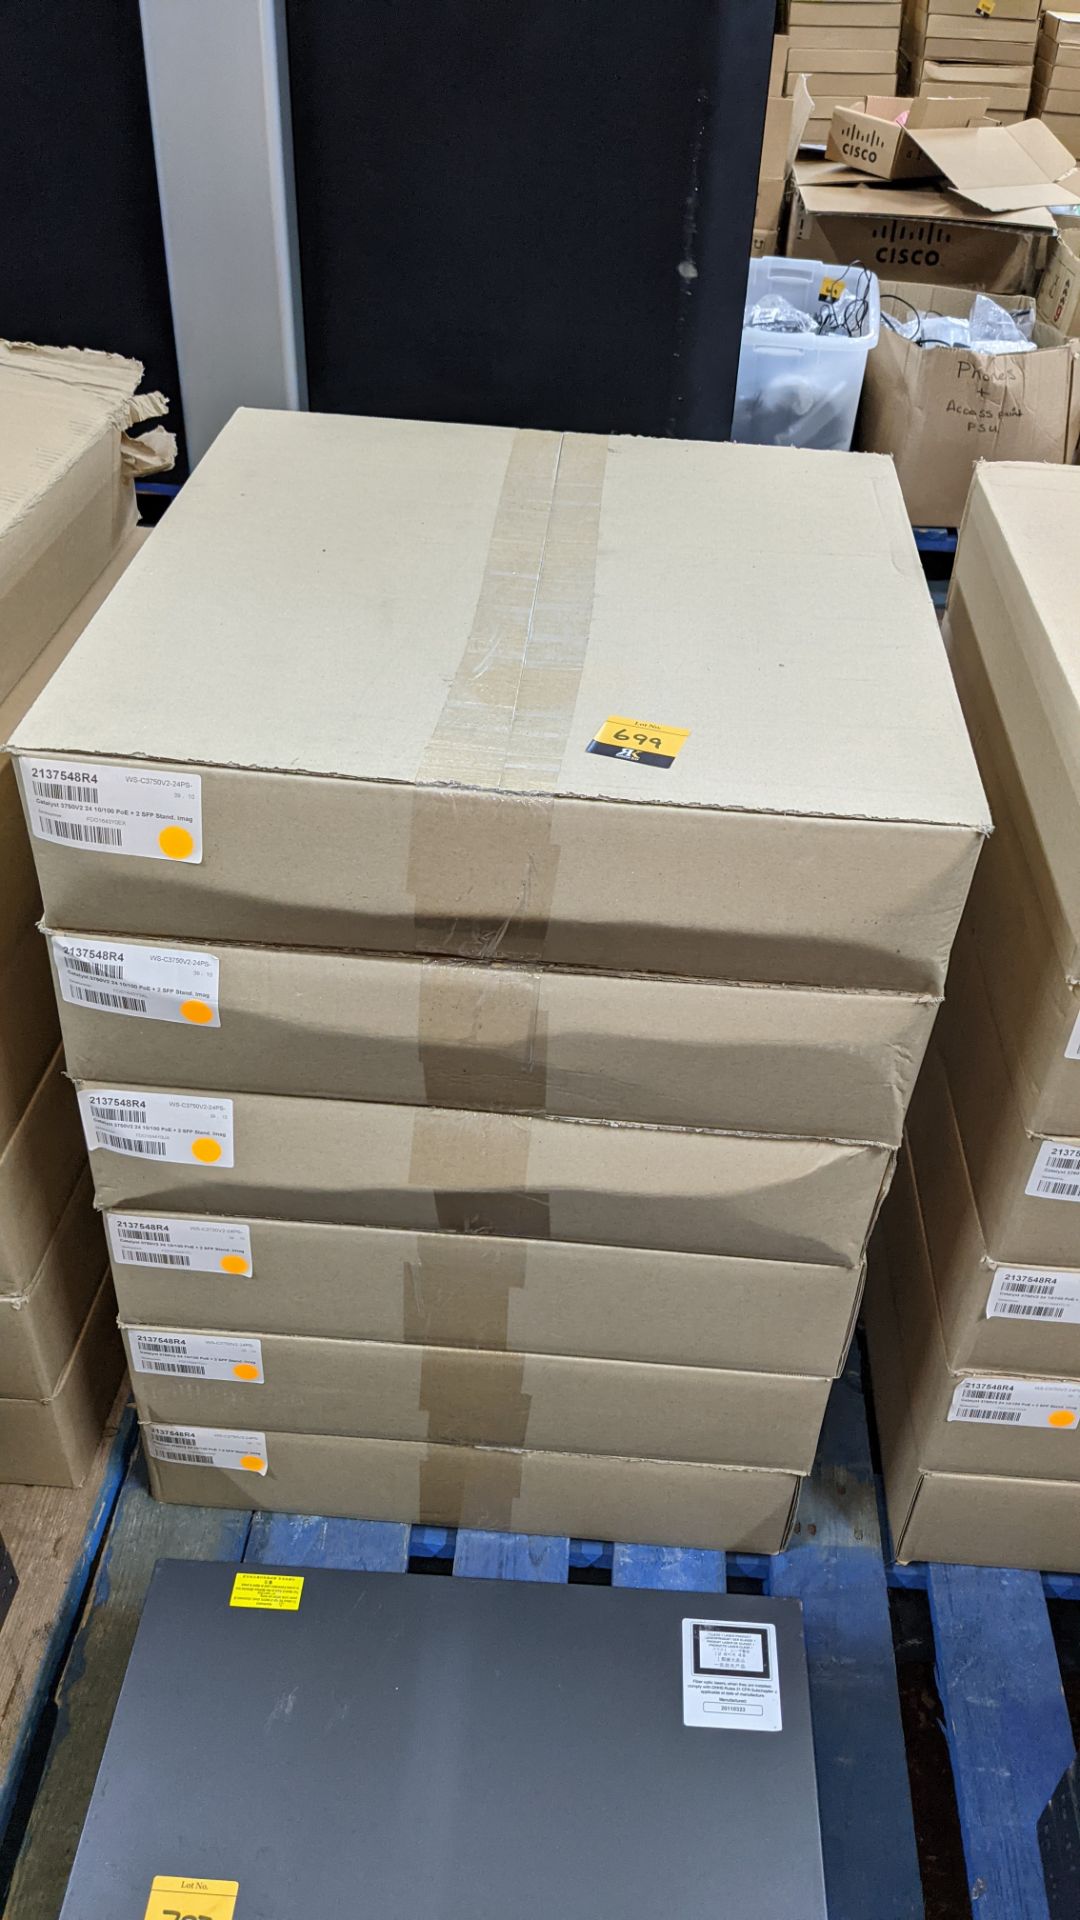 6 off Cisco 3750 V2 managed switches - we assume these are refurbished as each unit is wrapped in pl